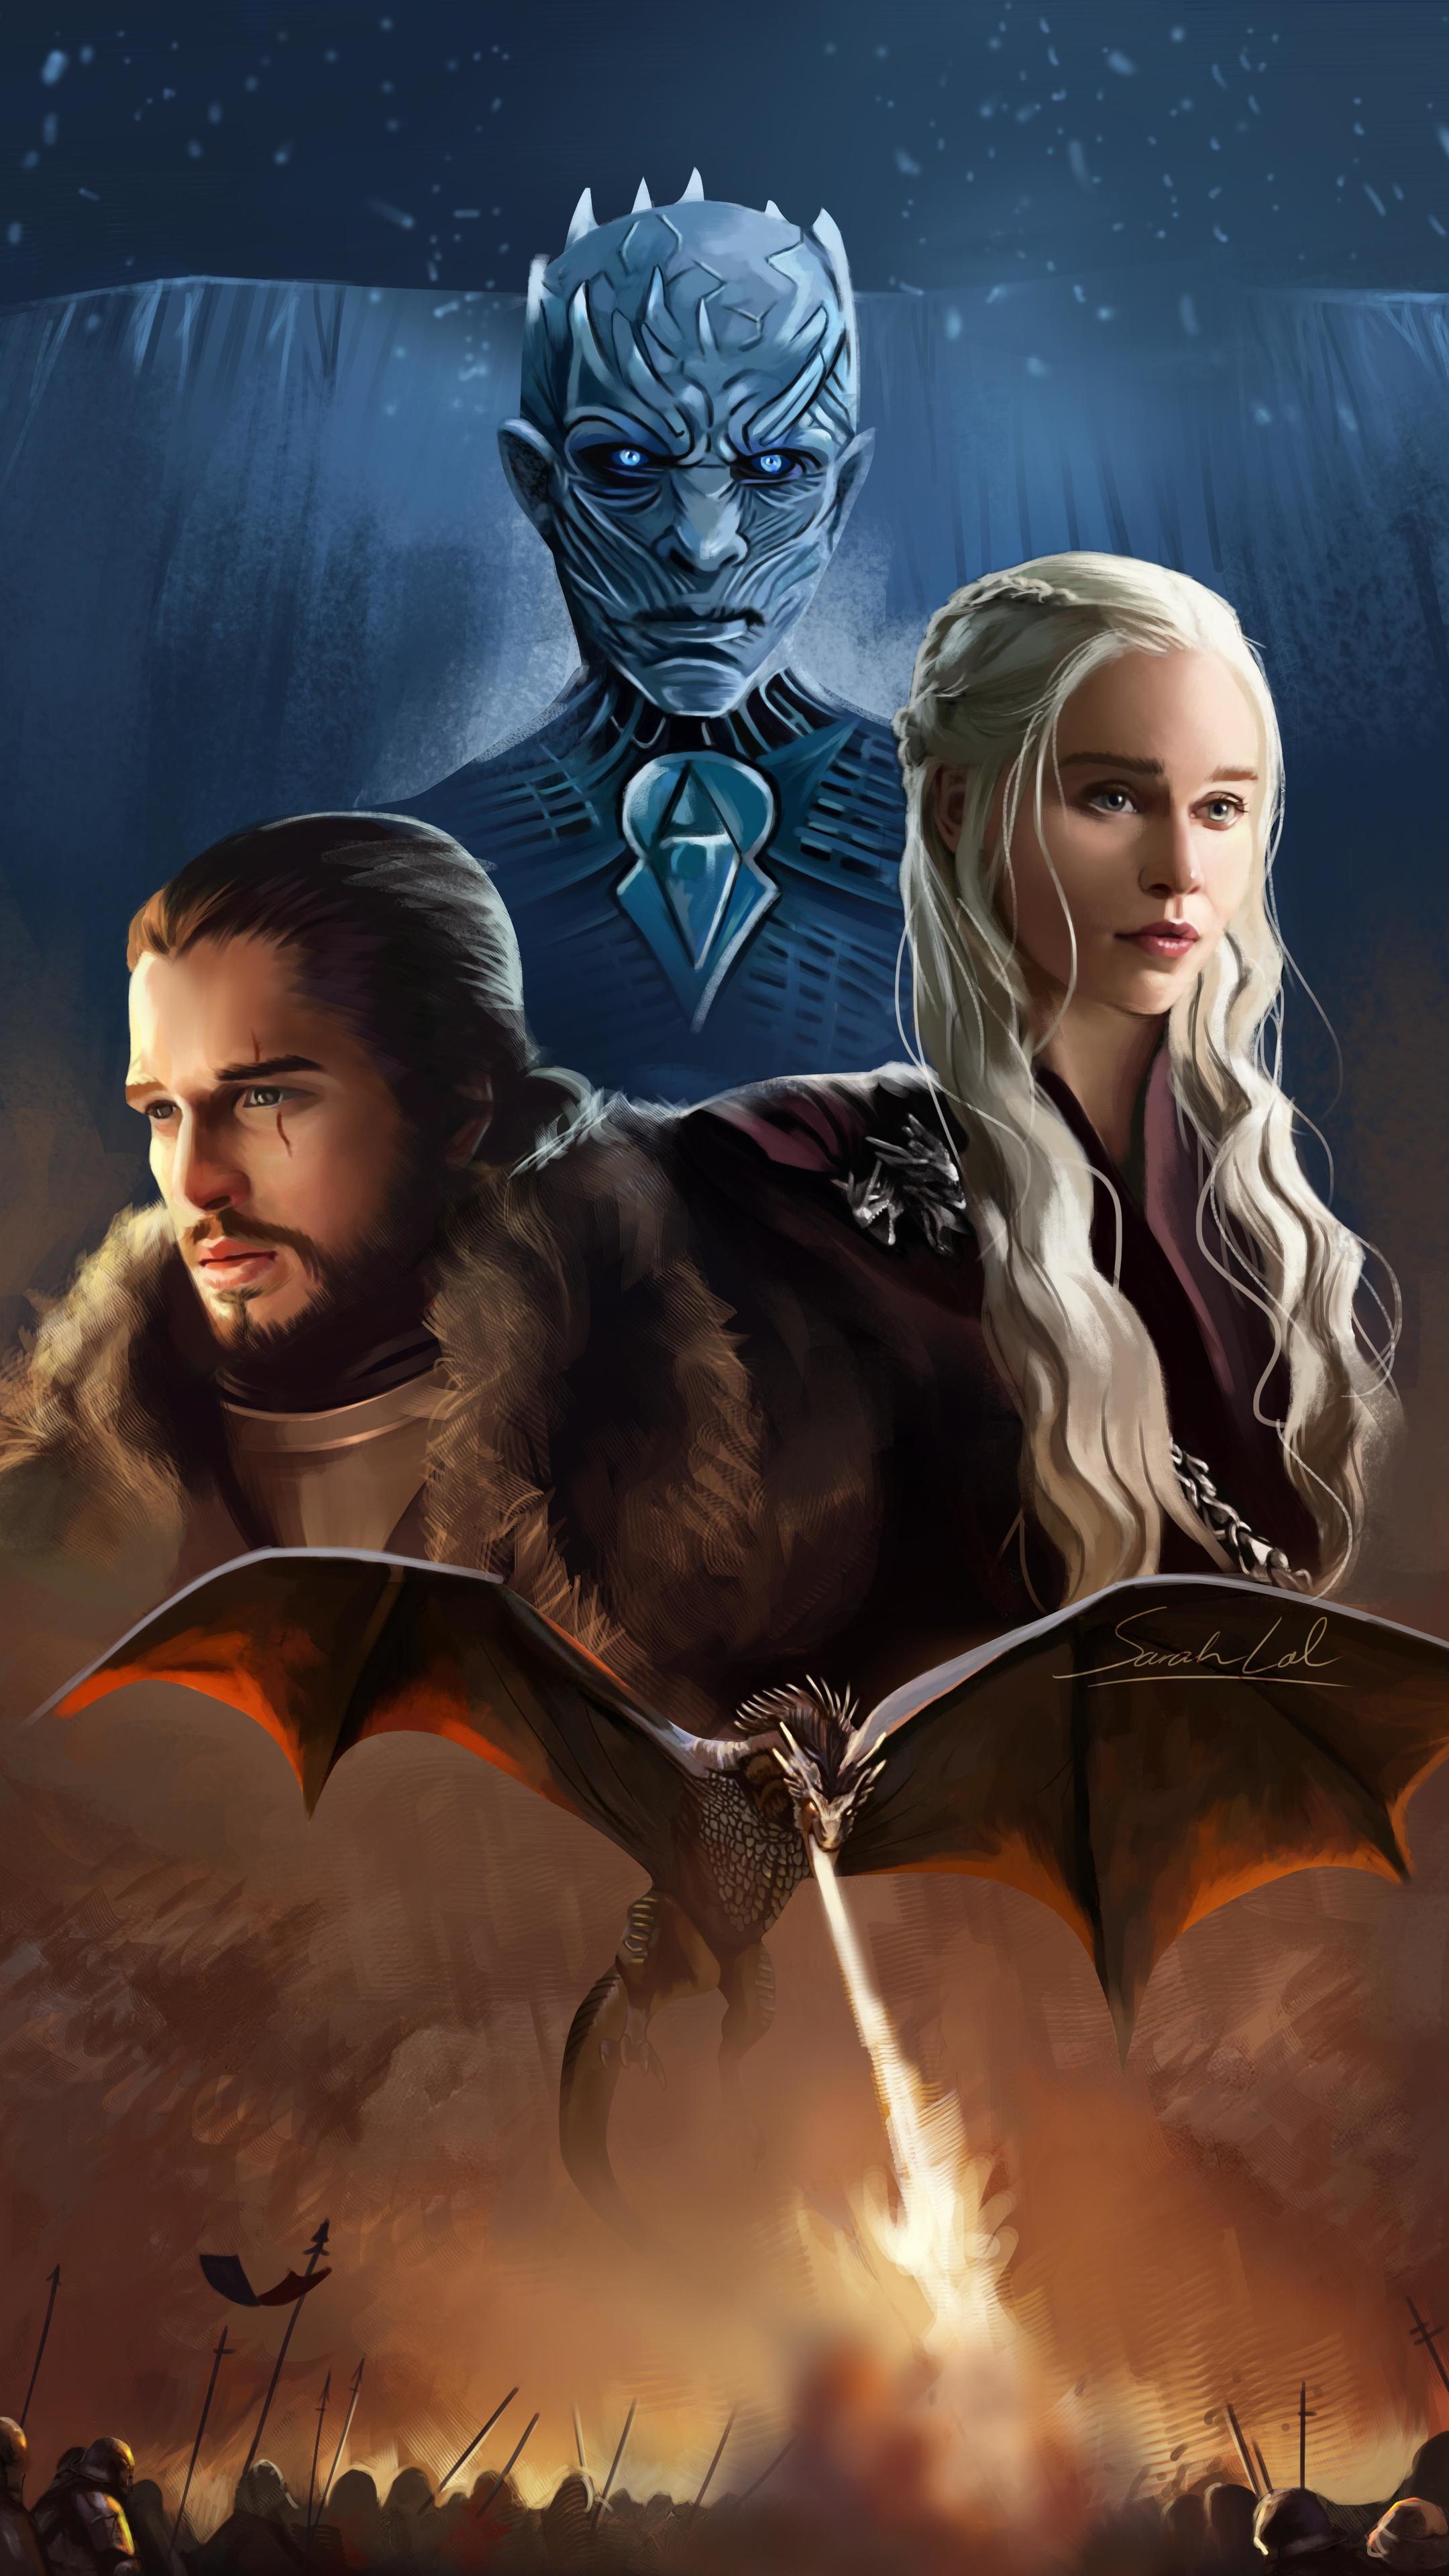 Game of Thrones iPhone wallpaper For iPhone XS Max